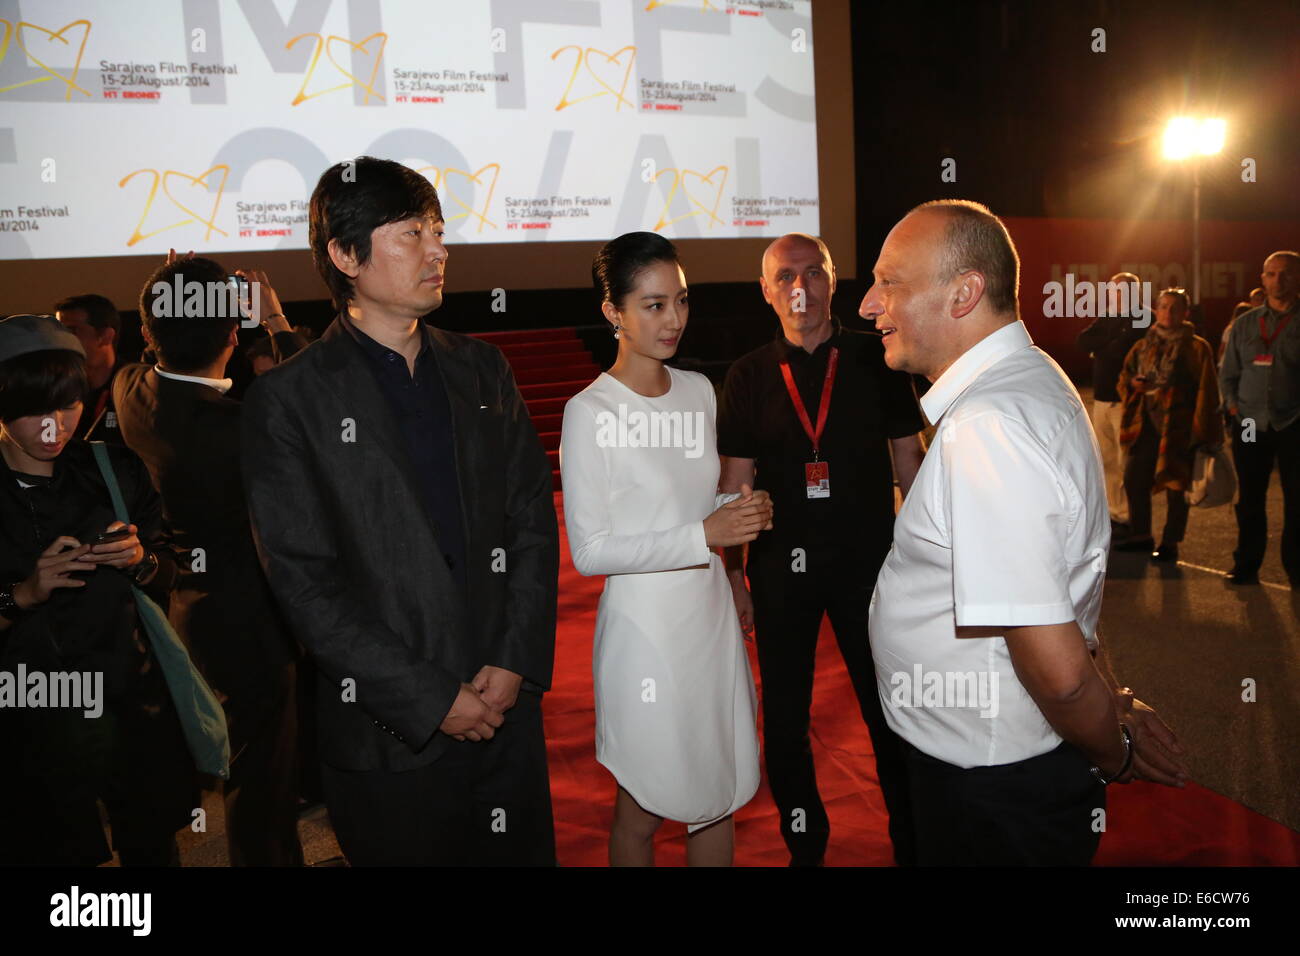 Sarajevo, Bosnia and Herzegovina. 20th Aug, 2014. Chinese director Diao Yinan (L), actress Kwai Lun-mei (C) and Director of Sarajevo Film Festival Mirsad Purivatra attend the open air of the movie 'Black Coal, Thin Ice' in Sarajevo, Bosnia and Herzegovina, on Aug. 20, 2014. 'Black Coal, Thin Ice', a Berlin Gold Bear winner, is in open air program in the ongoing 20th Sarajevo Film Festival. Credit:  Haris Memija/Xinhua/Alamy Live News Stock Photo